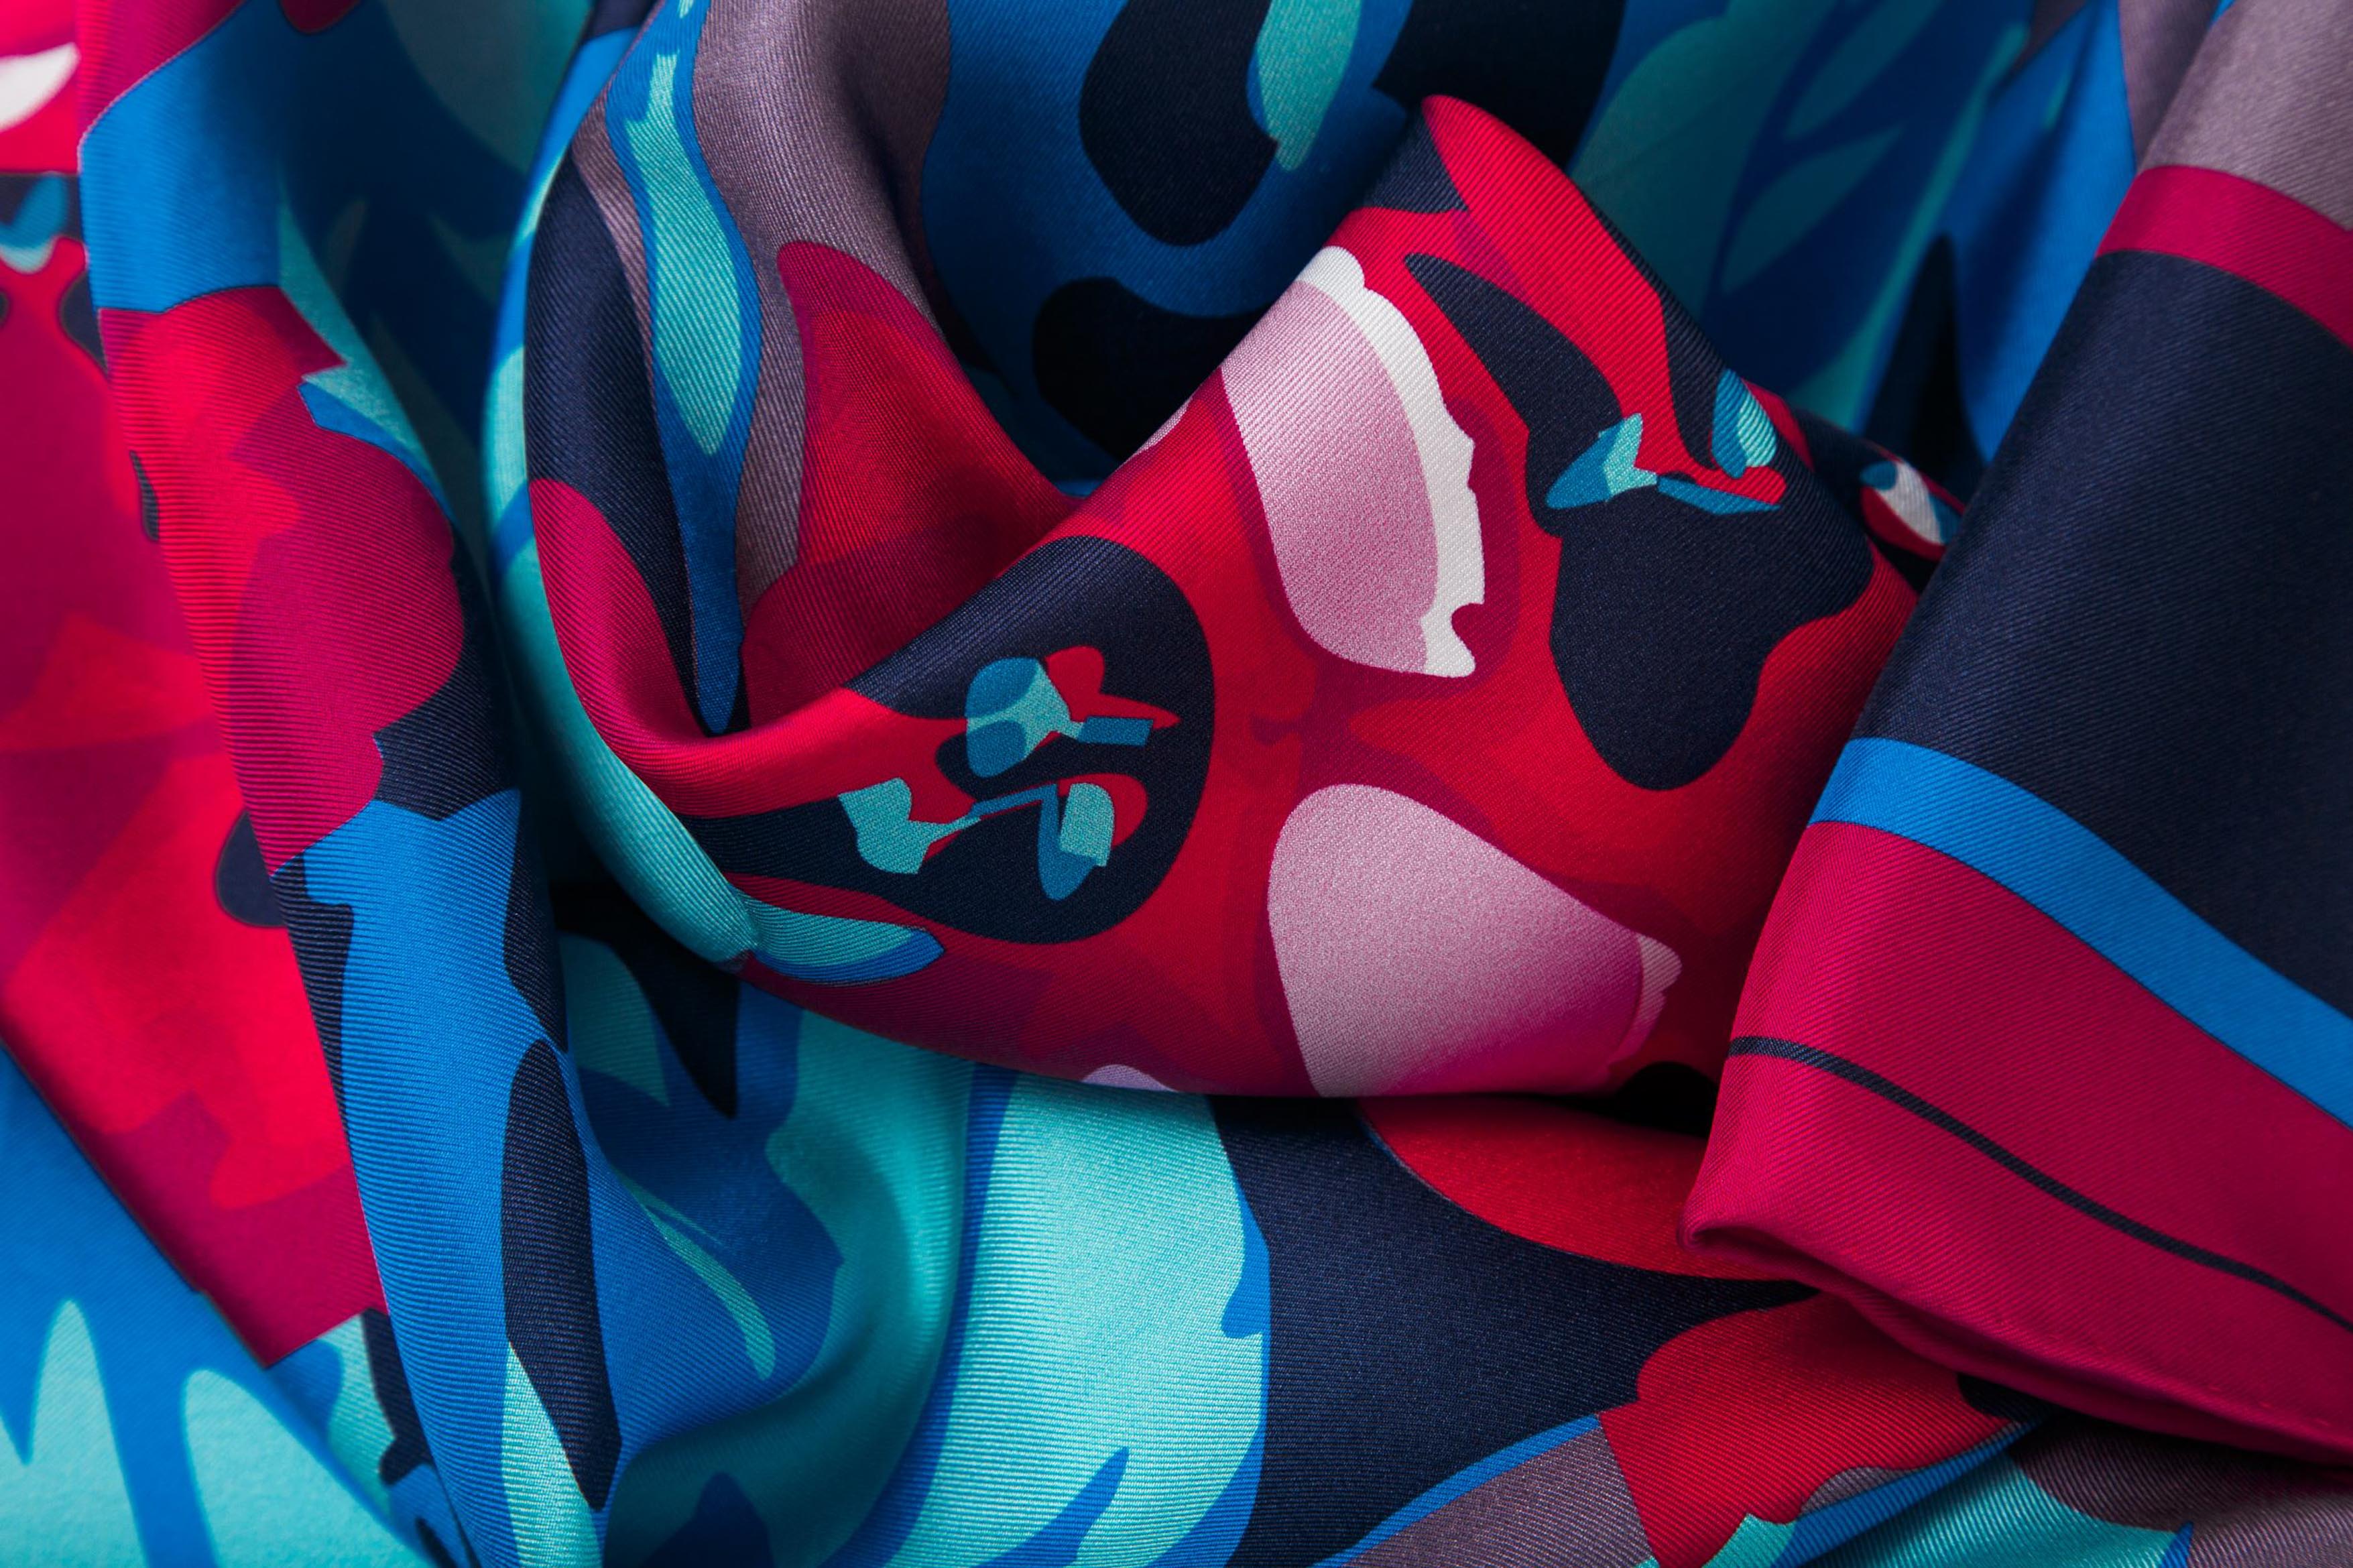 Close-up image of 100% silk square scarf featuring a motif of large-scale florals and leaves in shades of rich red, magenta, berry and marine blues on a background of smoky lilac, with a dark blue and magenta border around the edges. Illustrates the lightly ridged texture of the silk twill along with the rich color tones and luminous nature of the silk scarf.